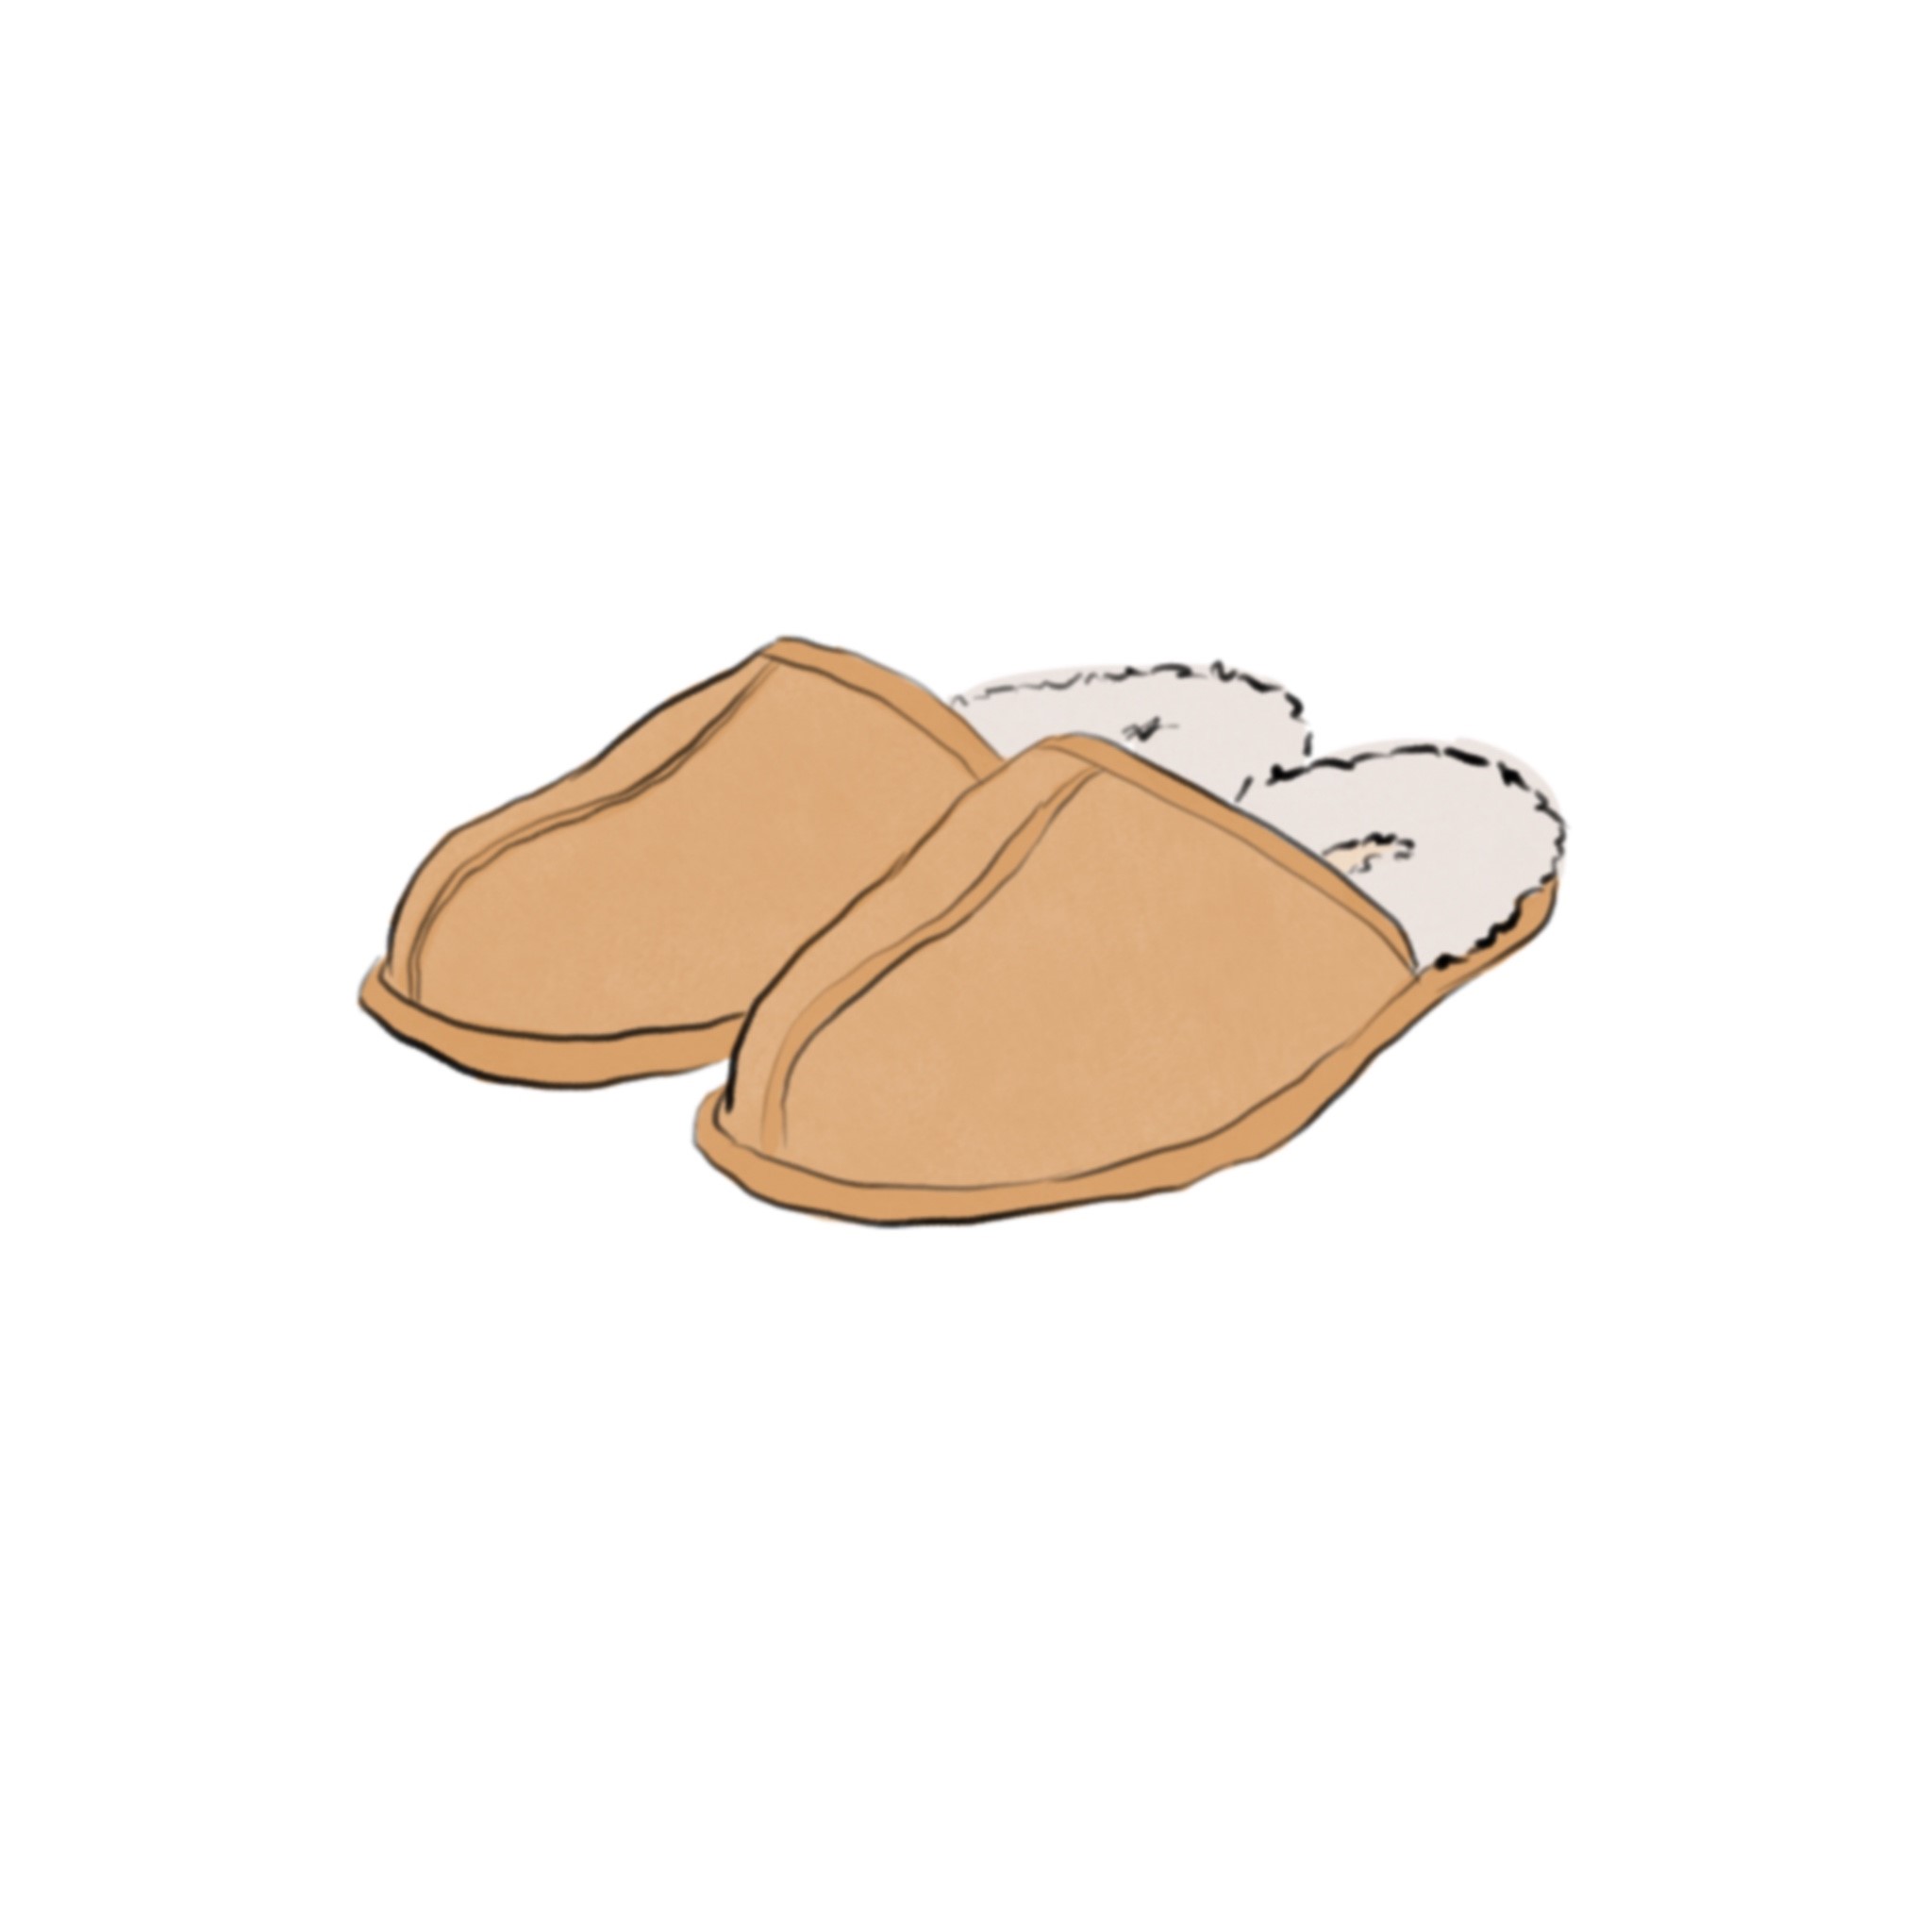 Illustration of a pair of tan slippers with fluffy white lining and open heels.